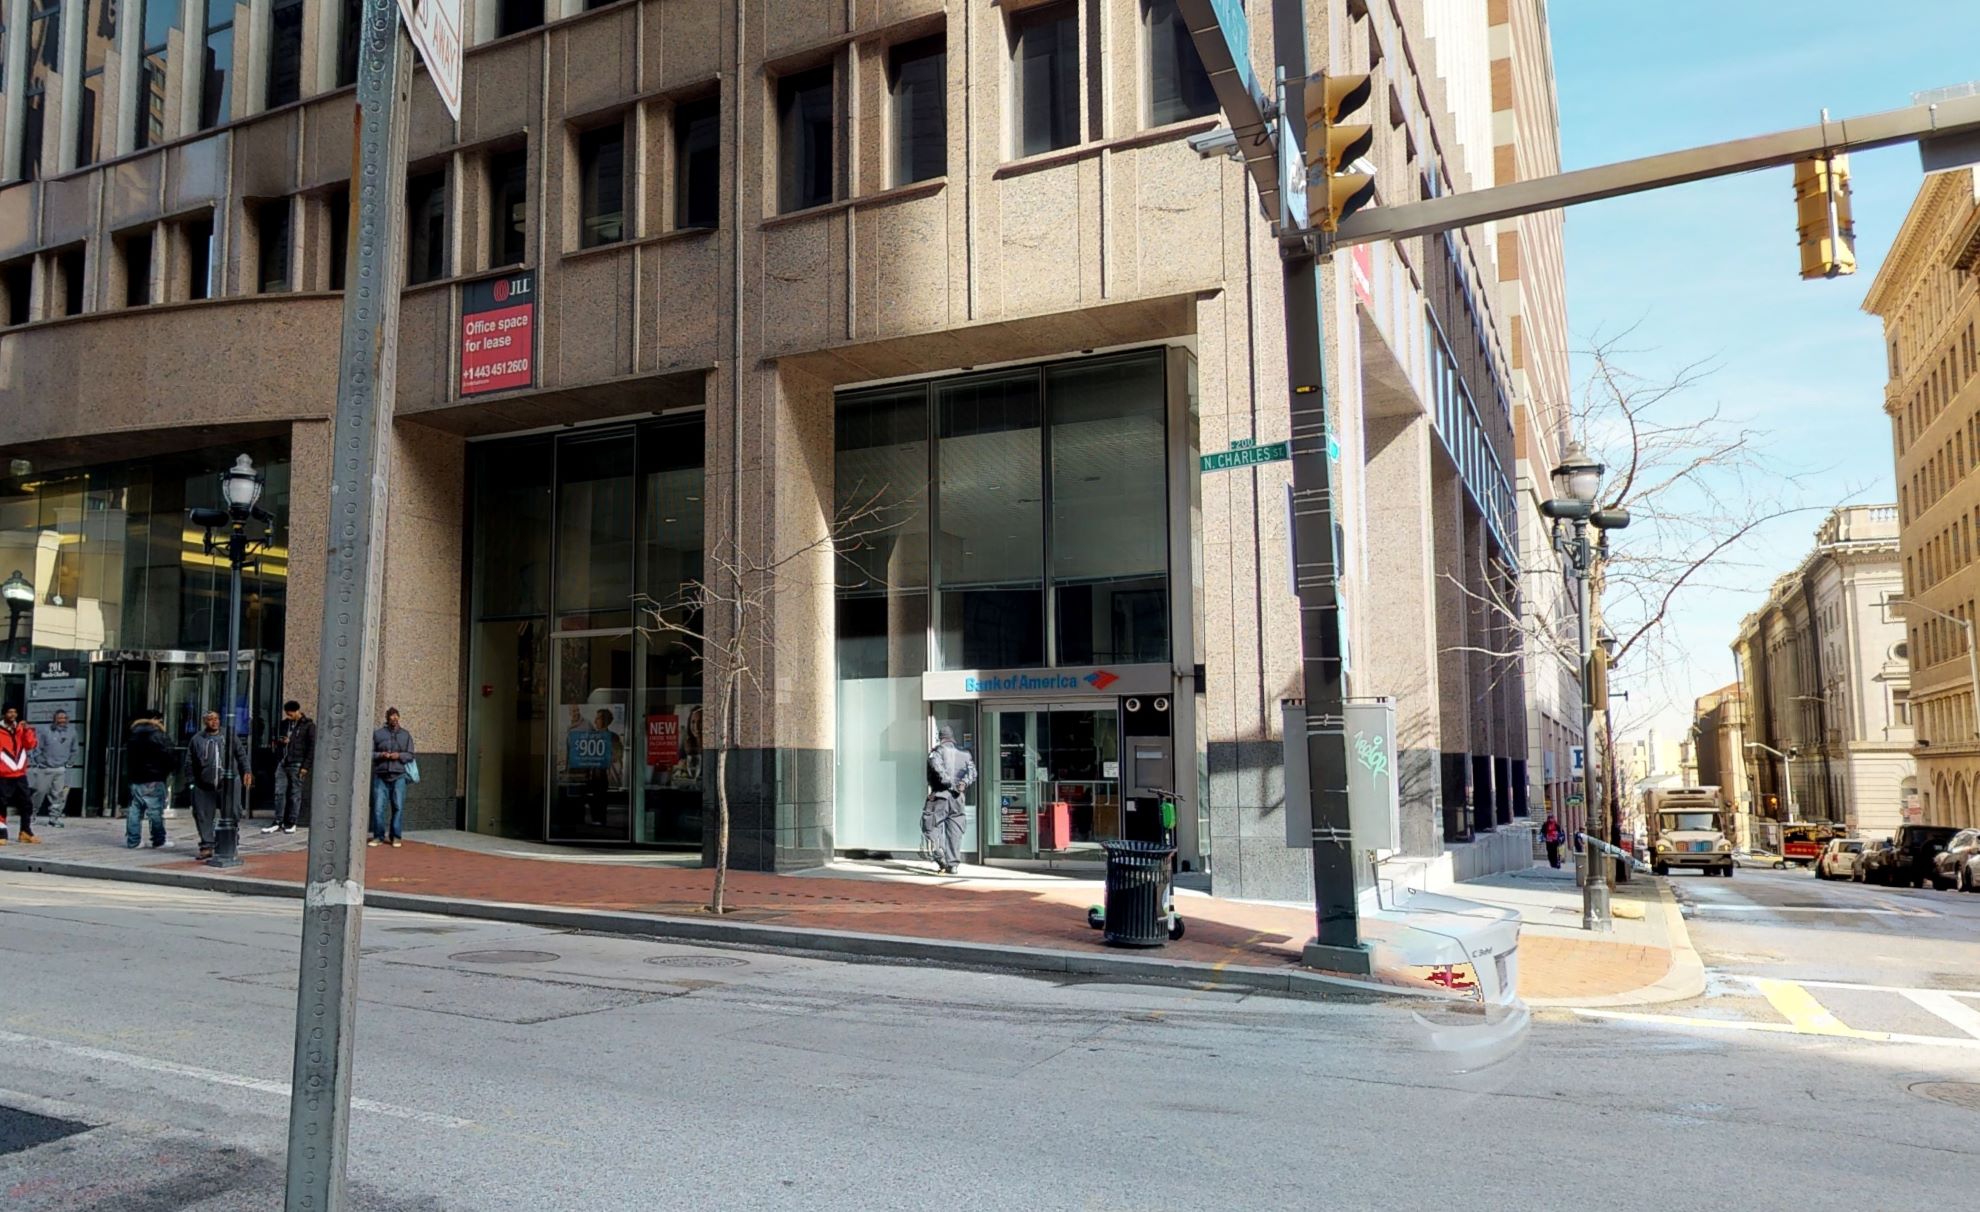 Bank of America financial center with walk-up ATM | 201 N Charles St, Baltimore, MD 21201